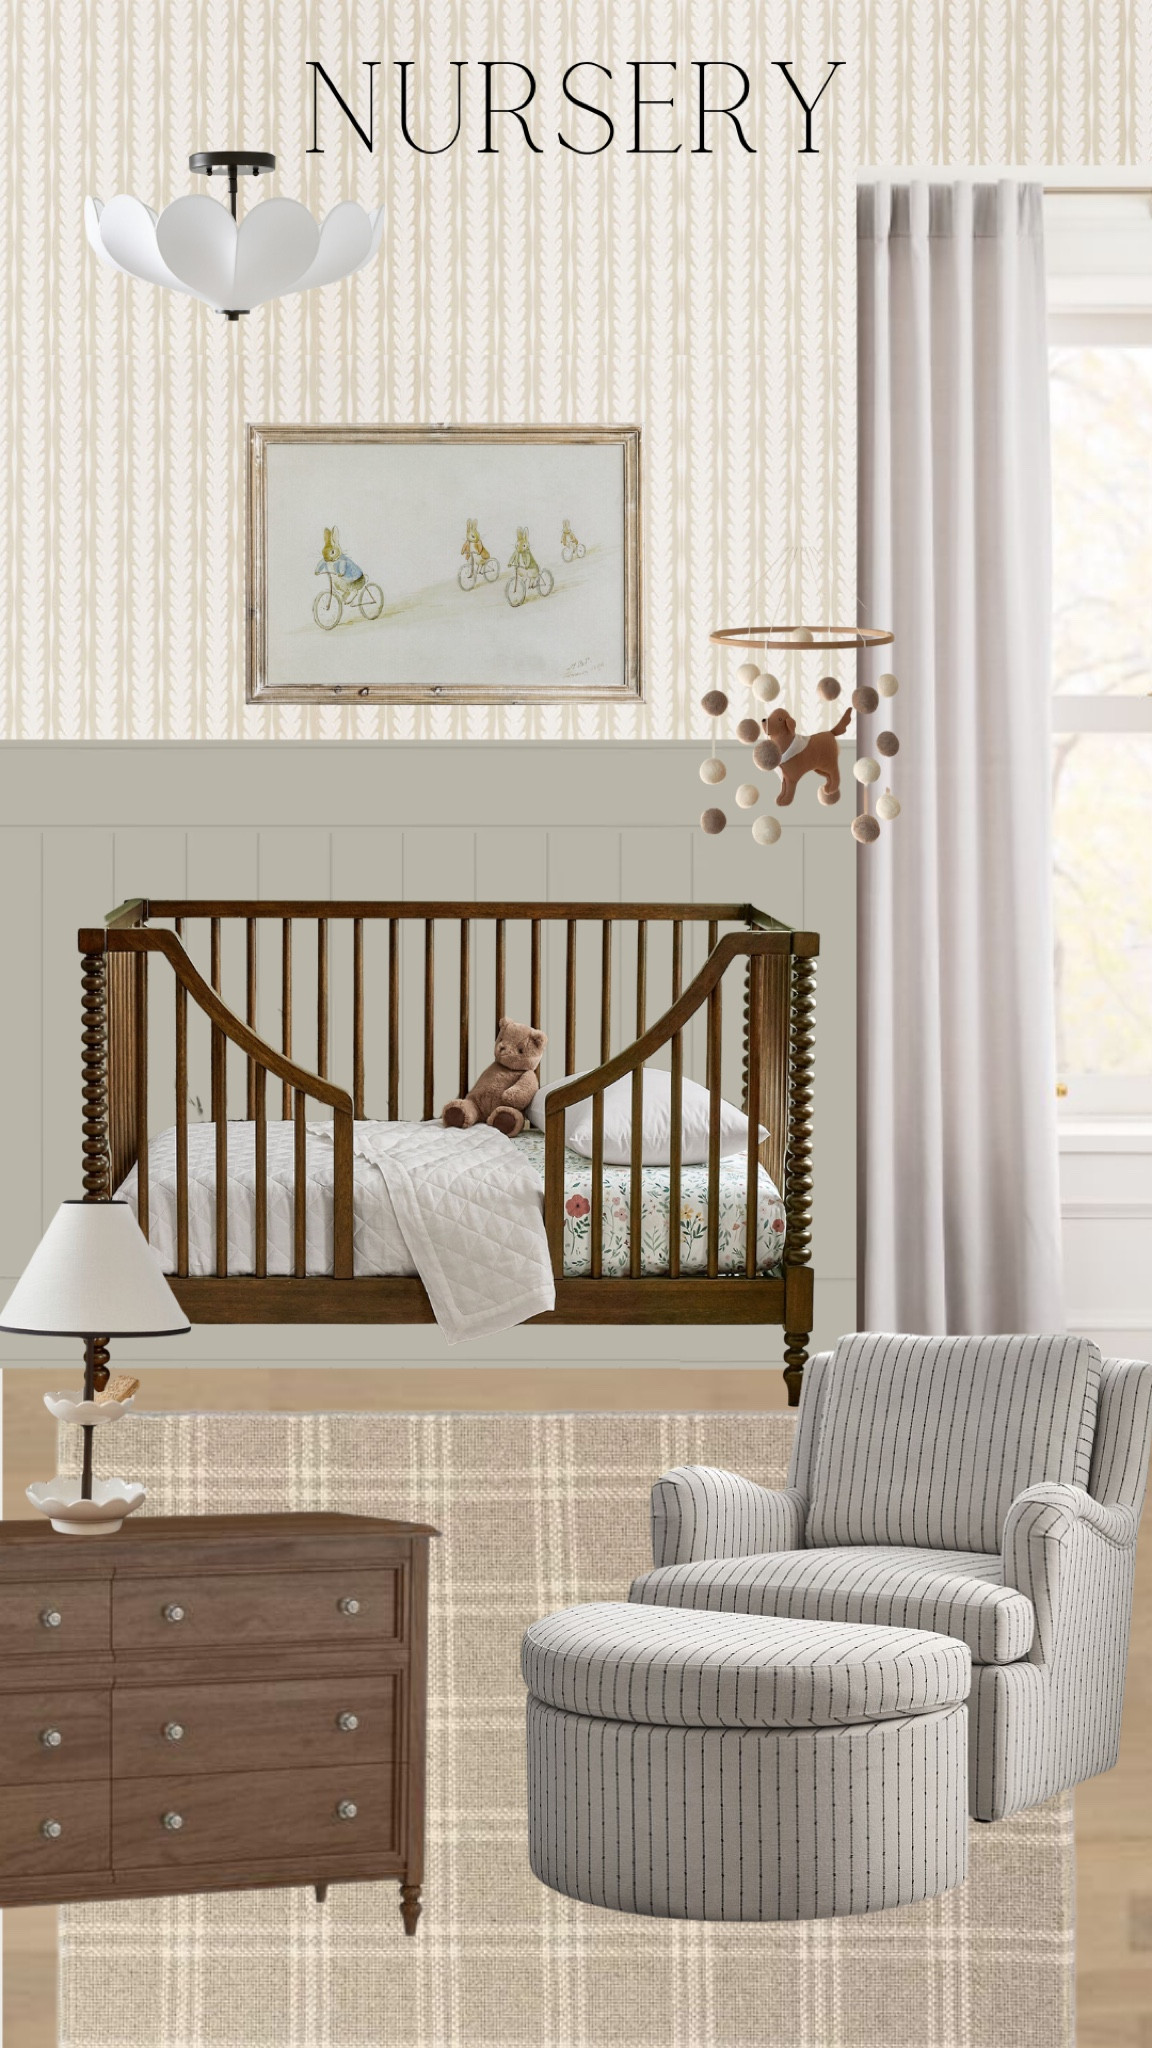 Introducing The CLJxPottery Barn Kids Collection! Chris, 54% OFF